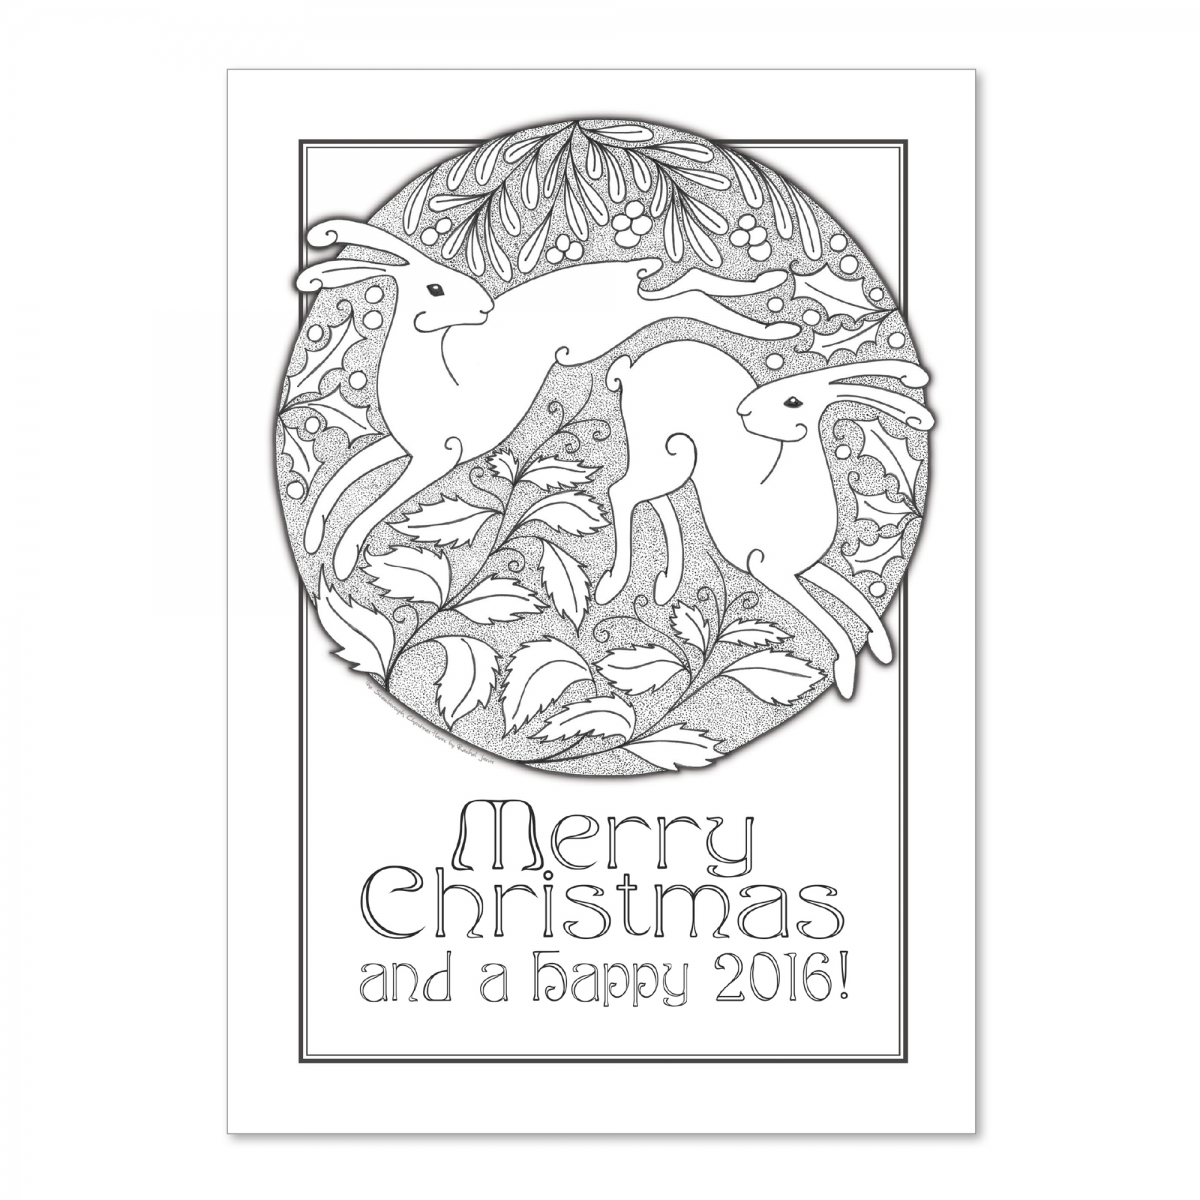 The Stainborough Christmas Hares